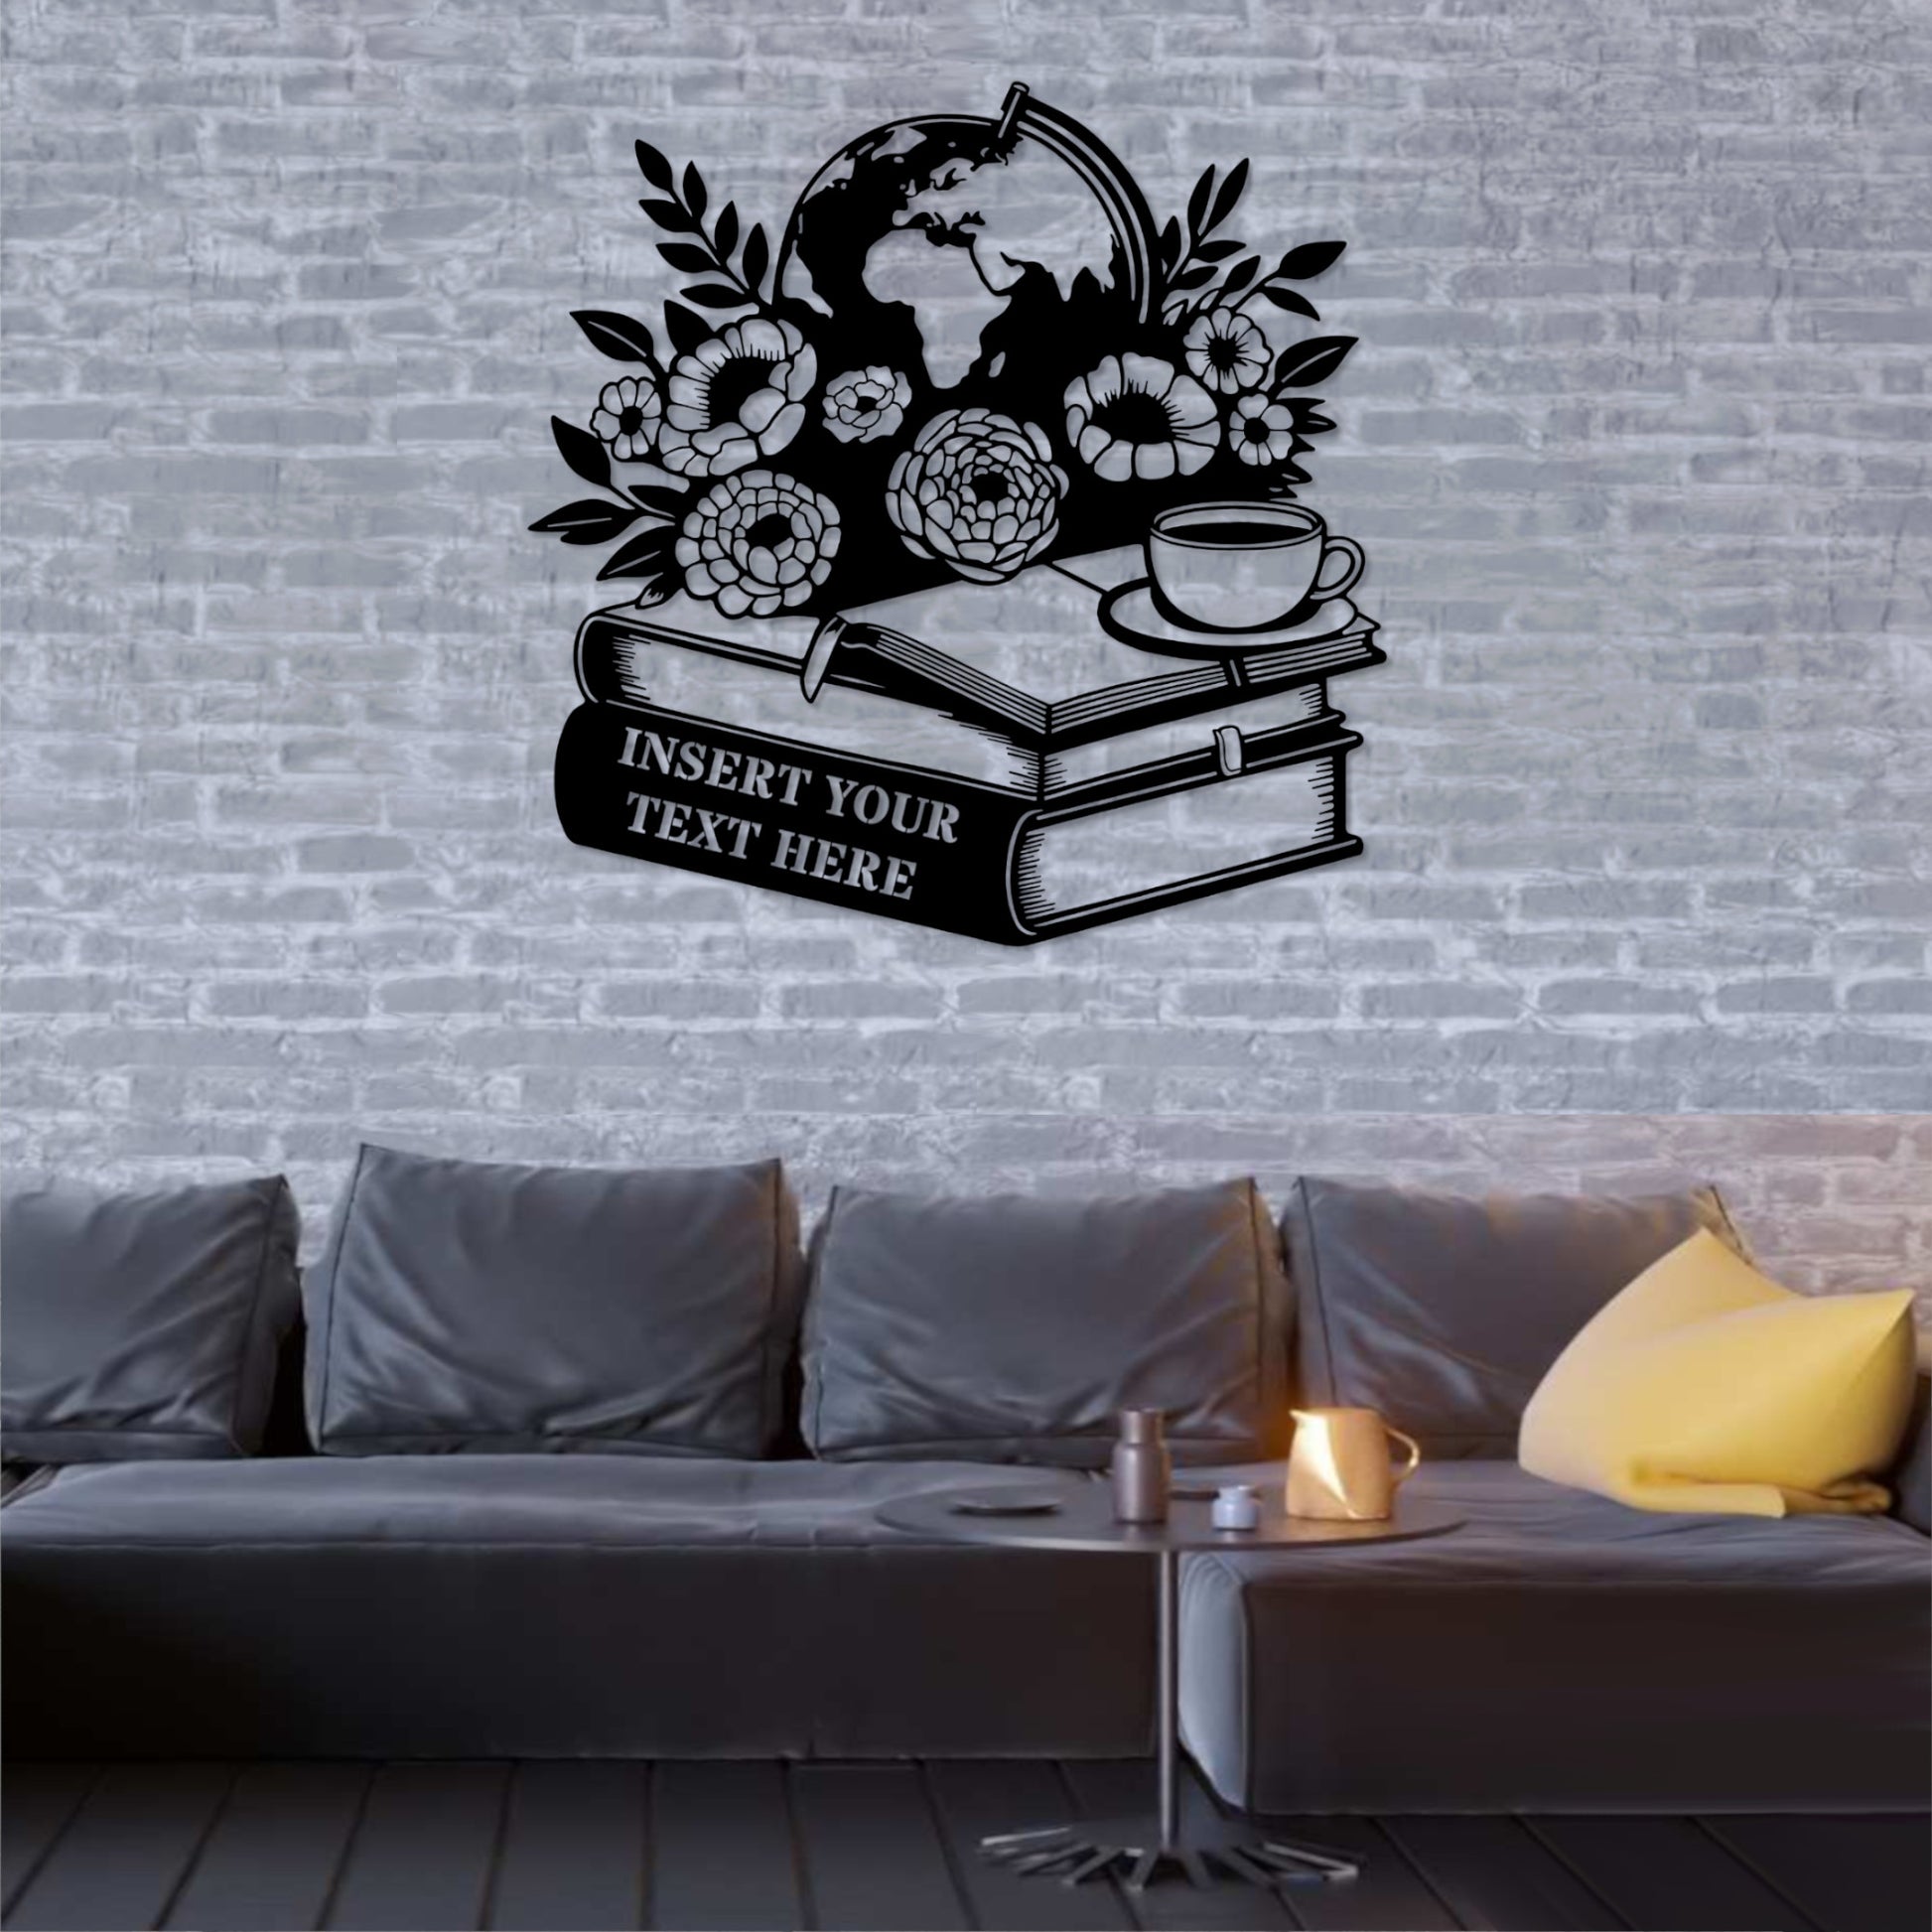 Personalized Floral Bookworm Name Metal Sign. Custom Home Library Wall Decor Gift. Geography Reader. Gift For Book Lover. School Class Decor